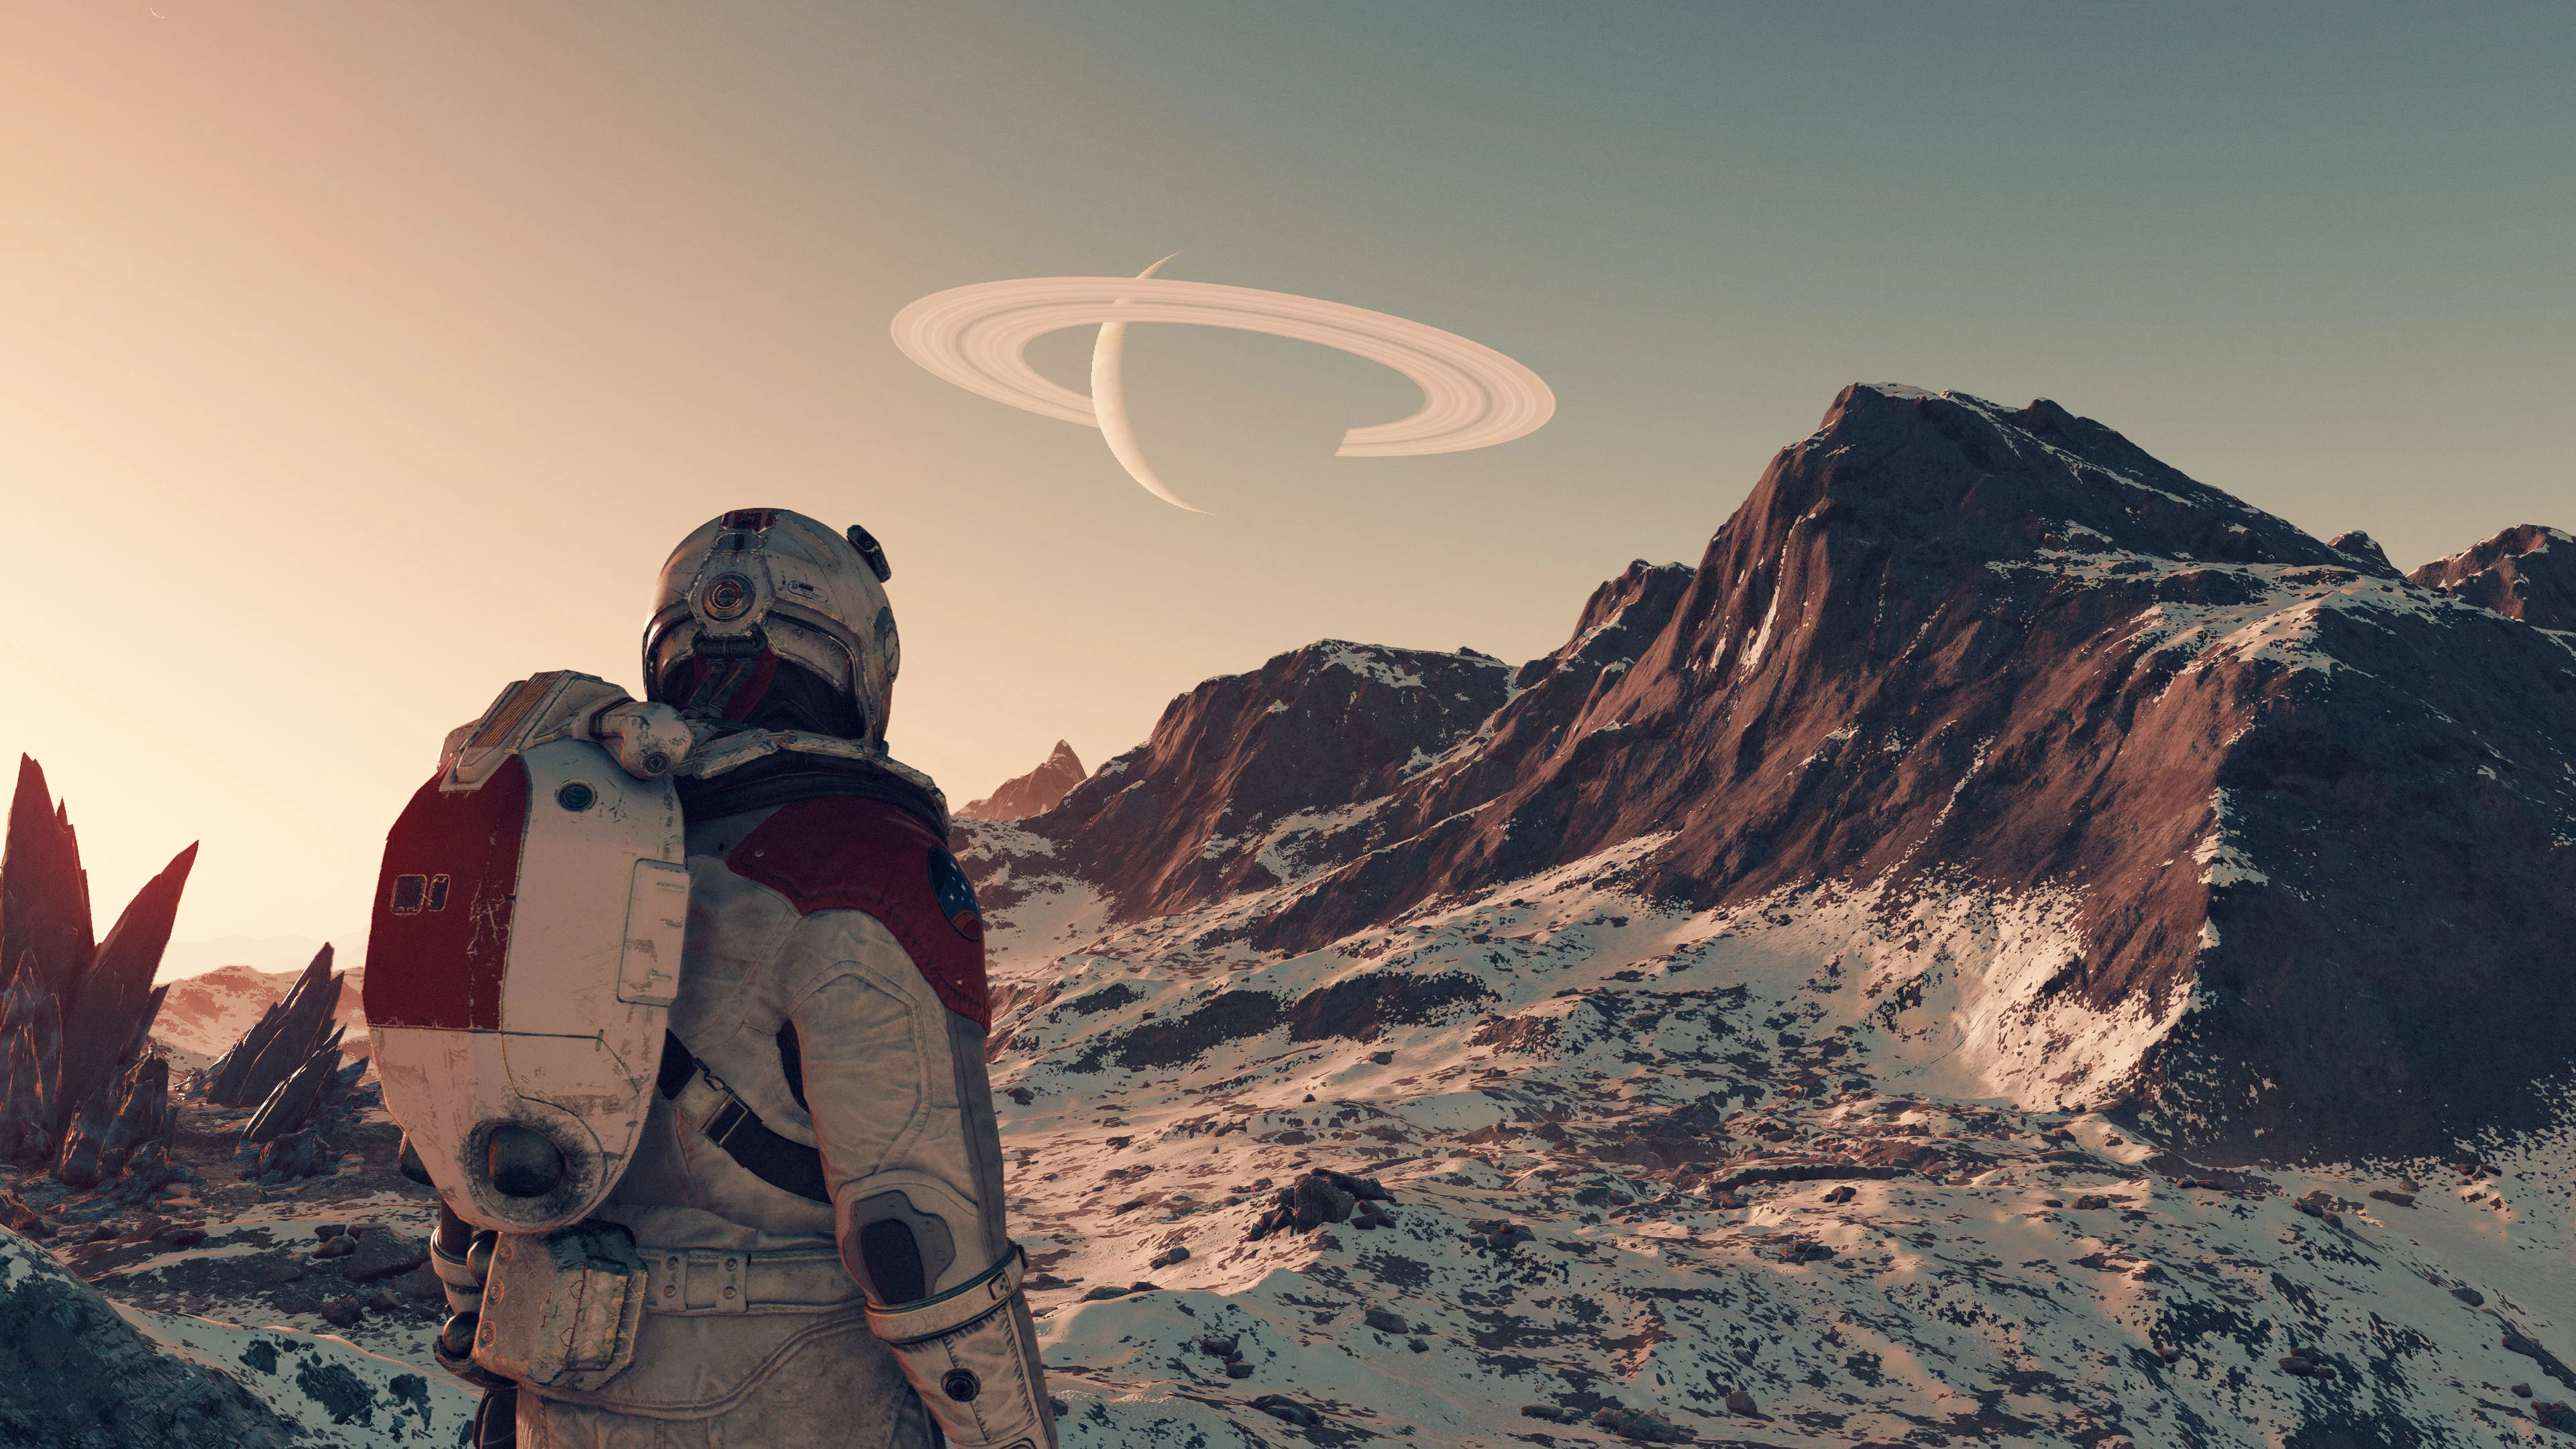 A person in a spacesuit exploring a planet